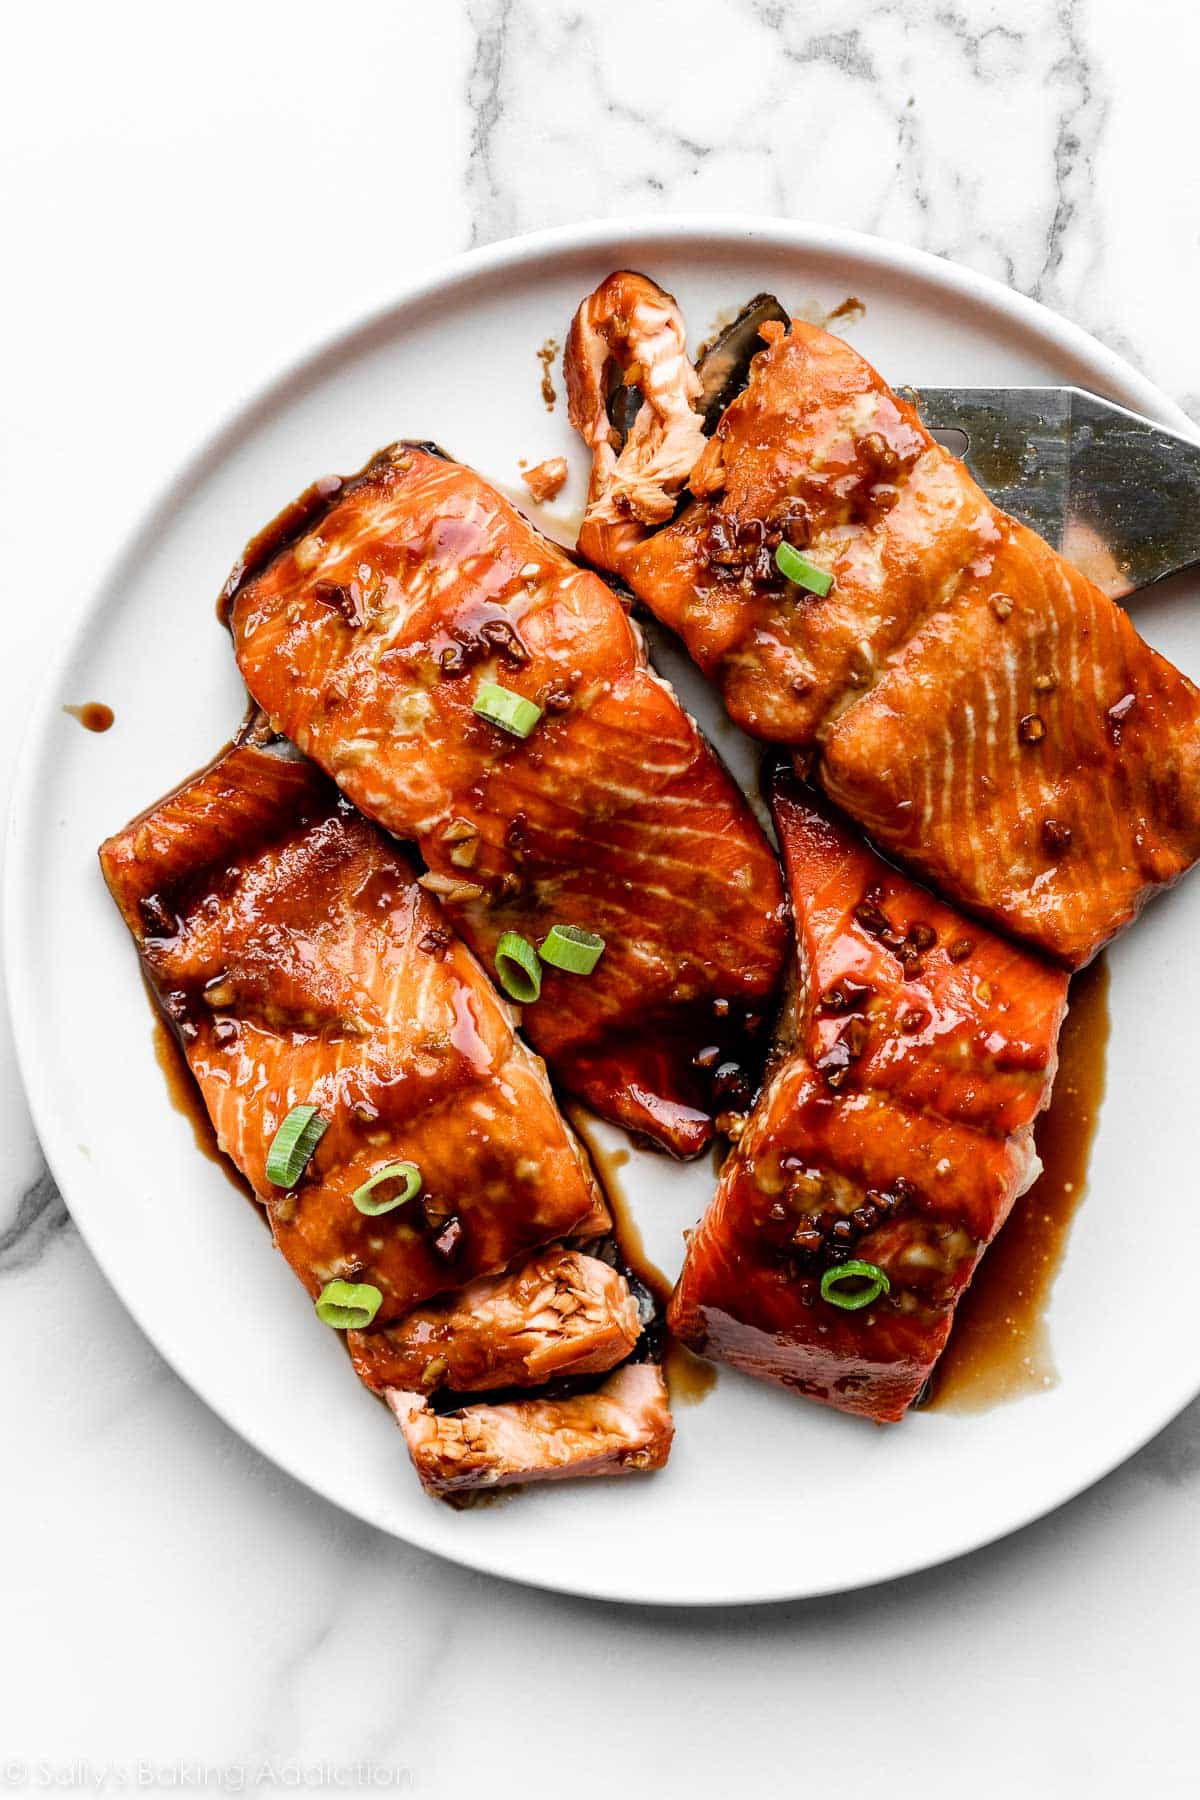 4 baked salmon filets on white plate smothered in a dark honey soy glaze and sprinkled with green onion.